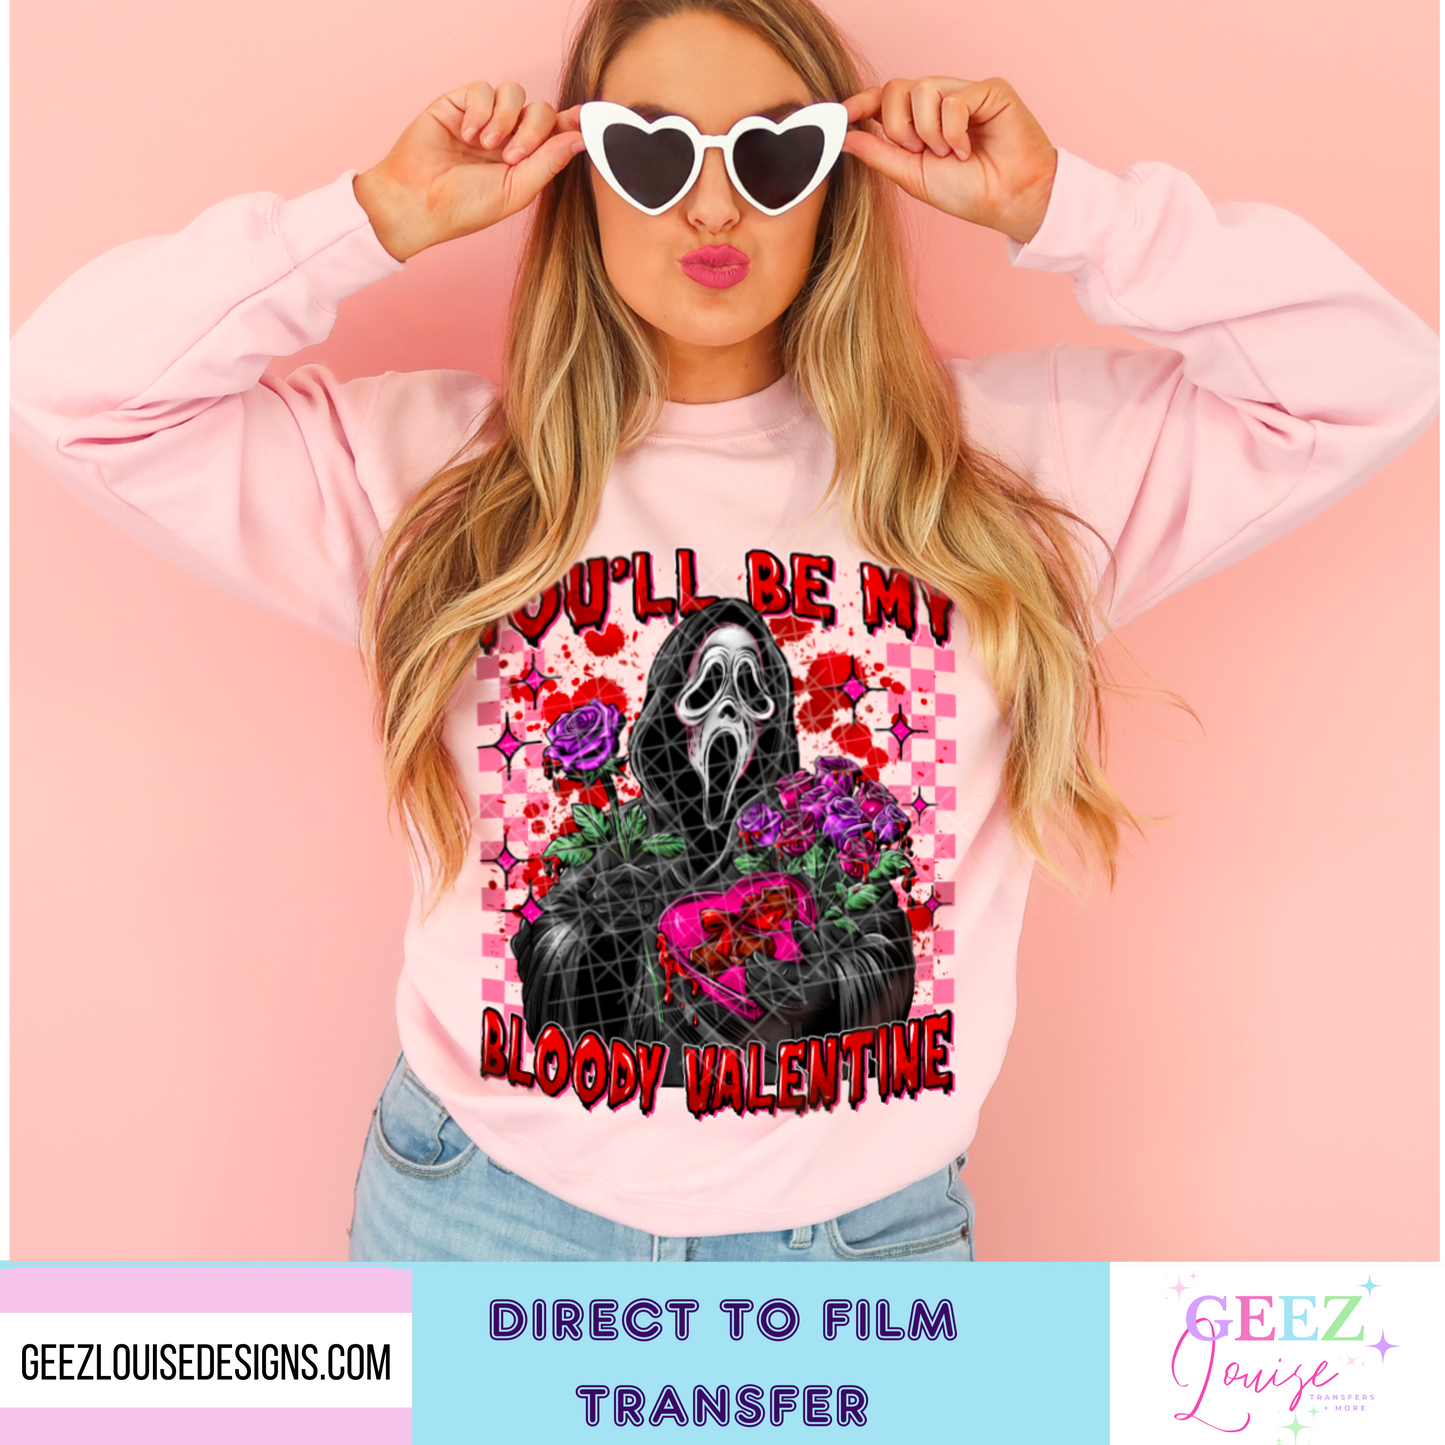 You'll be my bloody valentine - Direct to Film Transfer - made to order